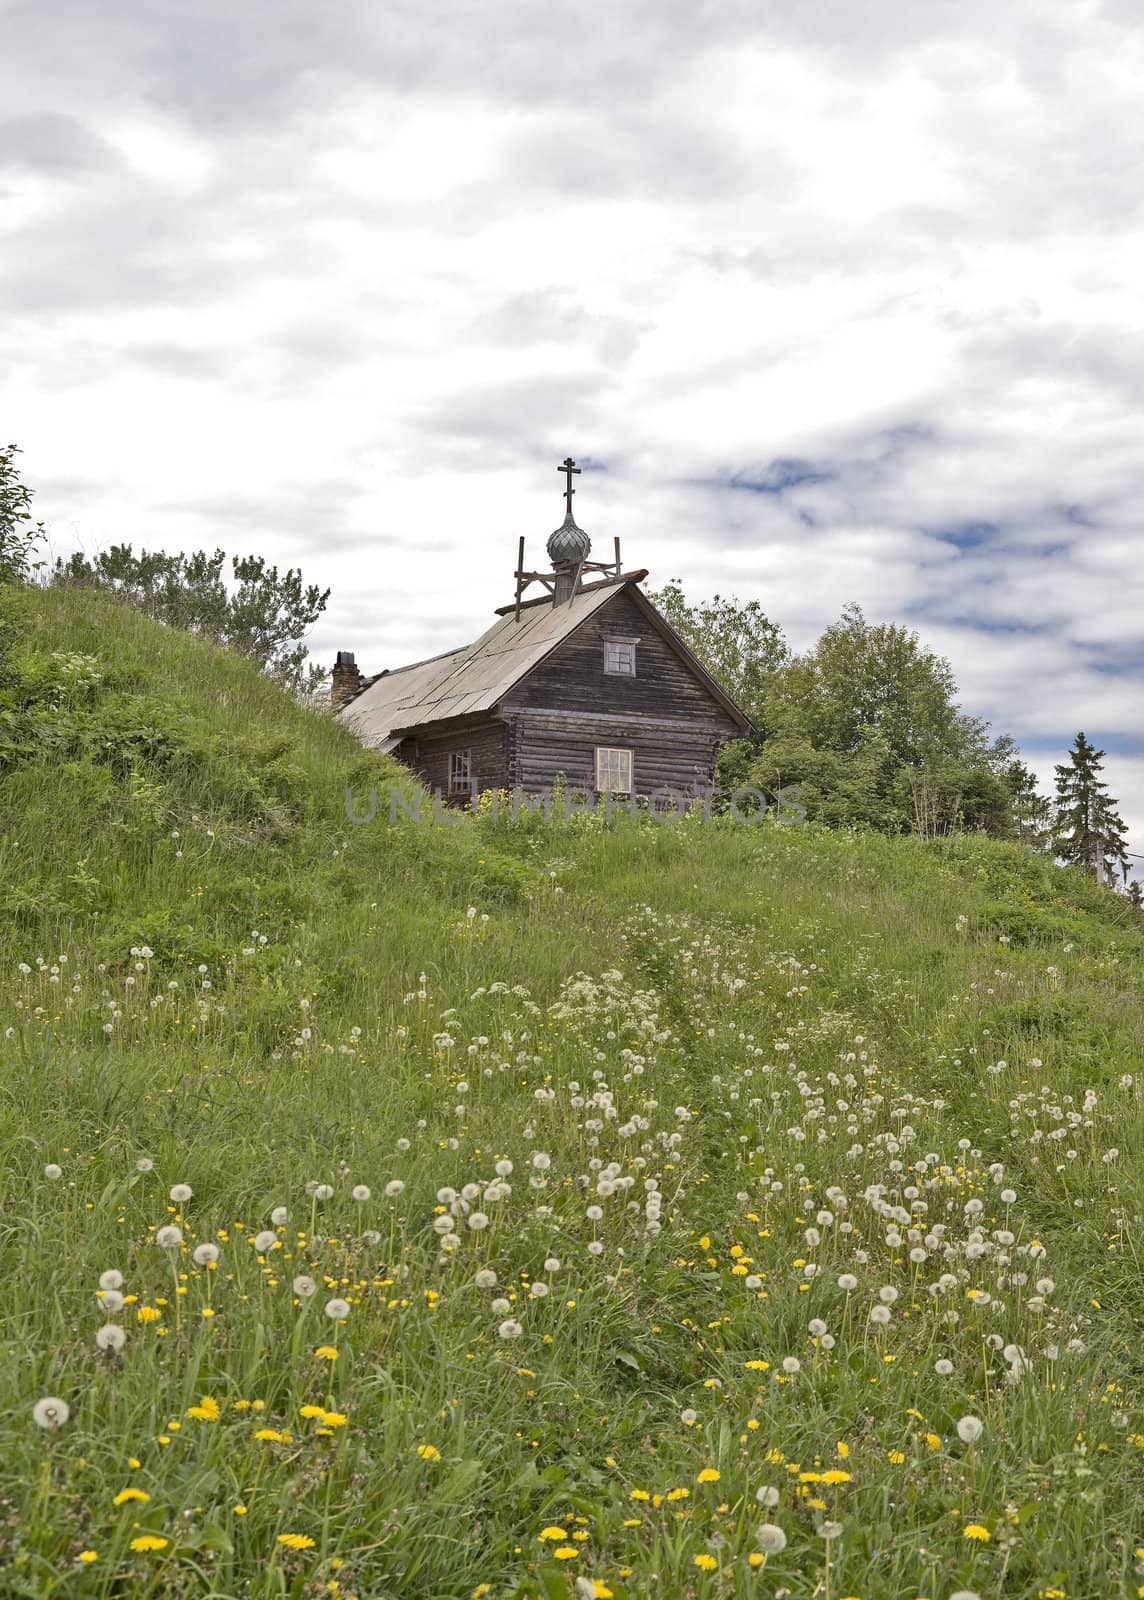 Small church on the hill by mulden